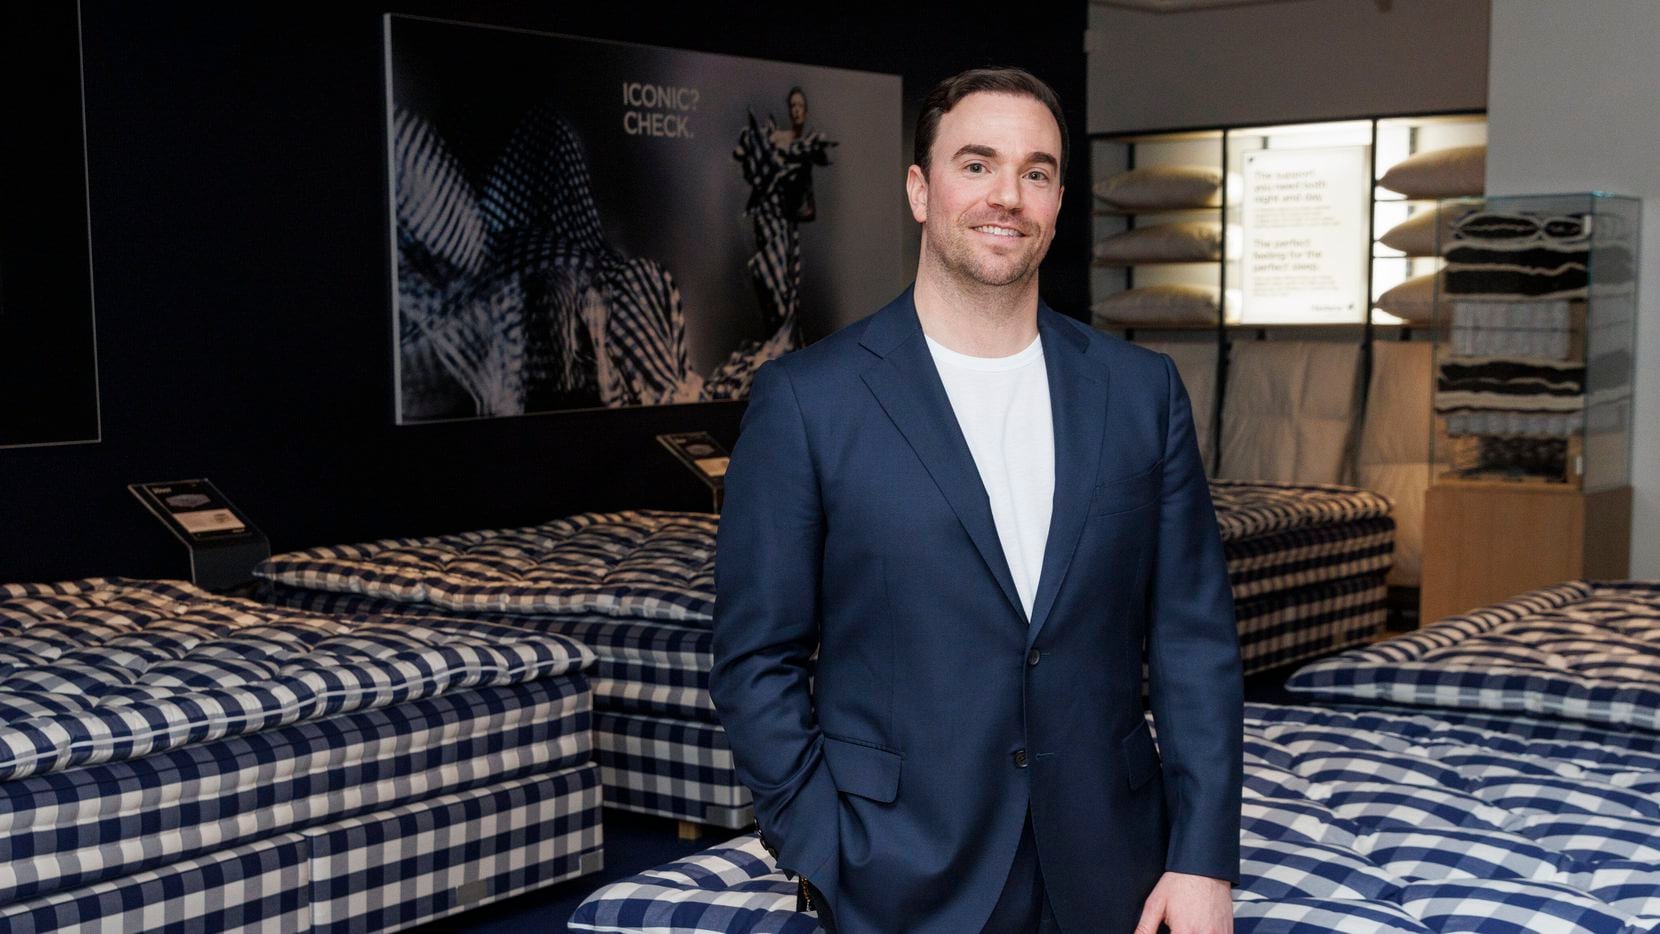 Bradley Belen, co-owner of the new Hästens store in Dallas along with MadaLuxe Group, where...